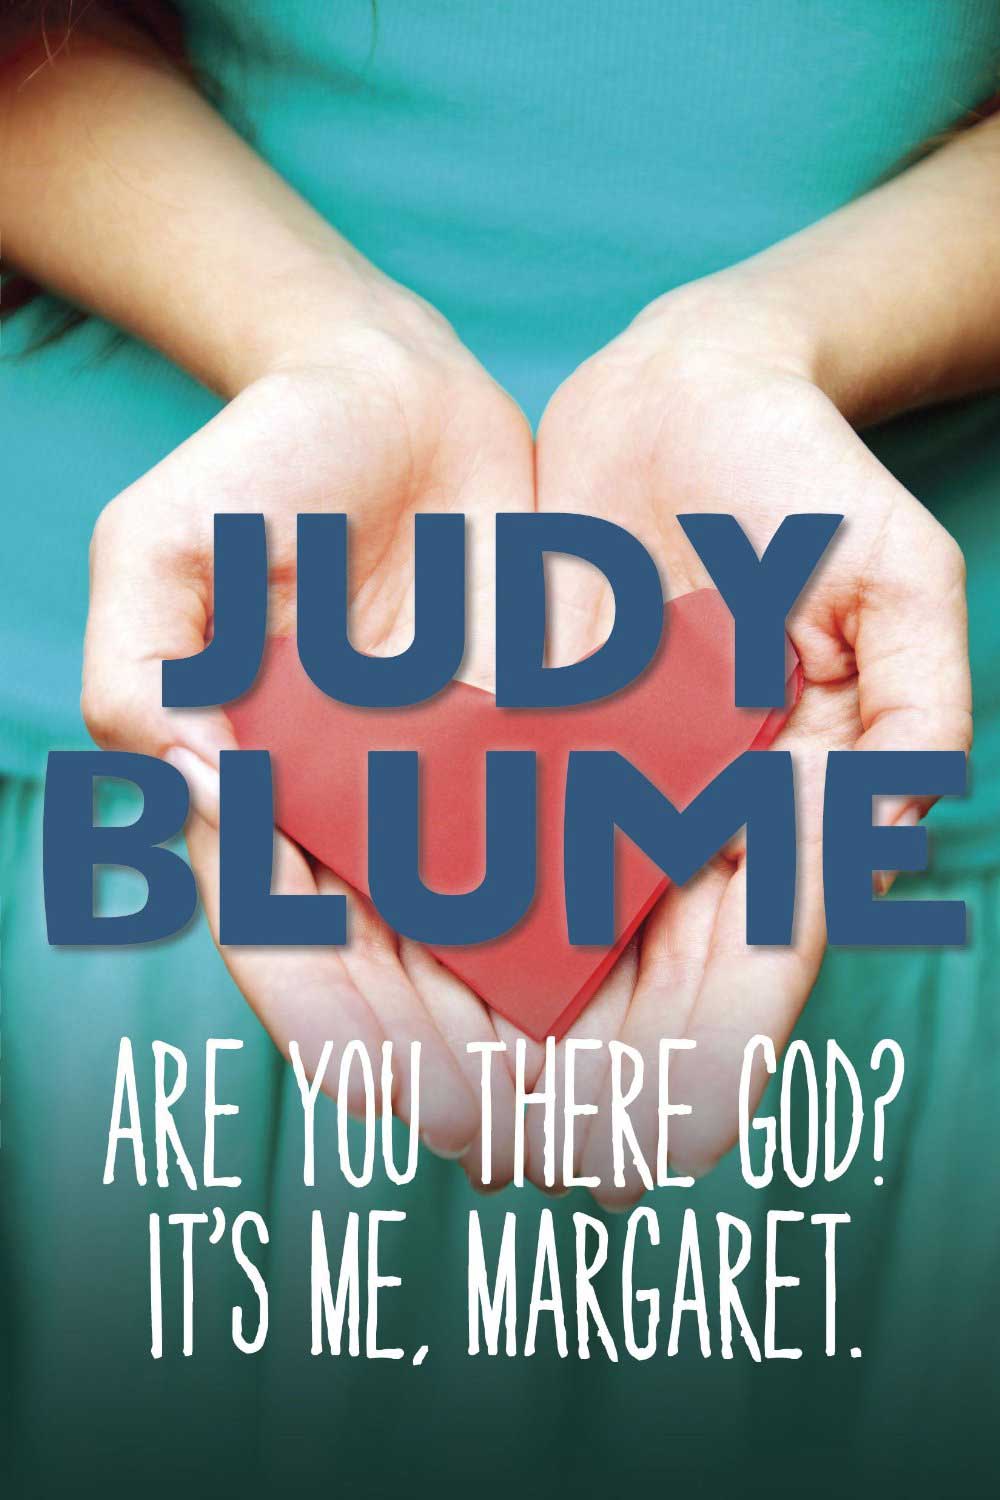 Are You There God? It's Me, Margaret, by Judy Blume. 
                              
                              
                              
                              Twelve-year-old Margaret, whose mother is Christian and father Jewish, explores her religious heritage while overcoming the general social and personal challenges of a preteen girl.
                              
                              
                              
                              Buy now: Are You There God? It's Me, Margaret